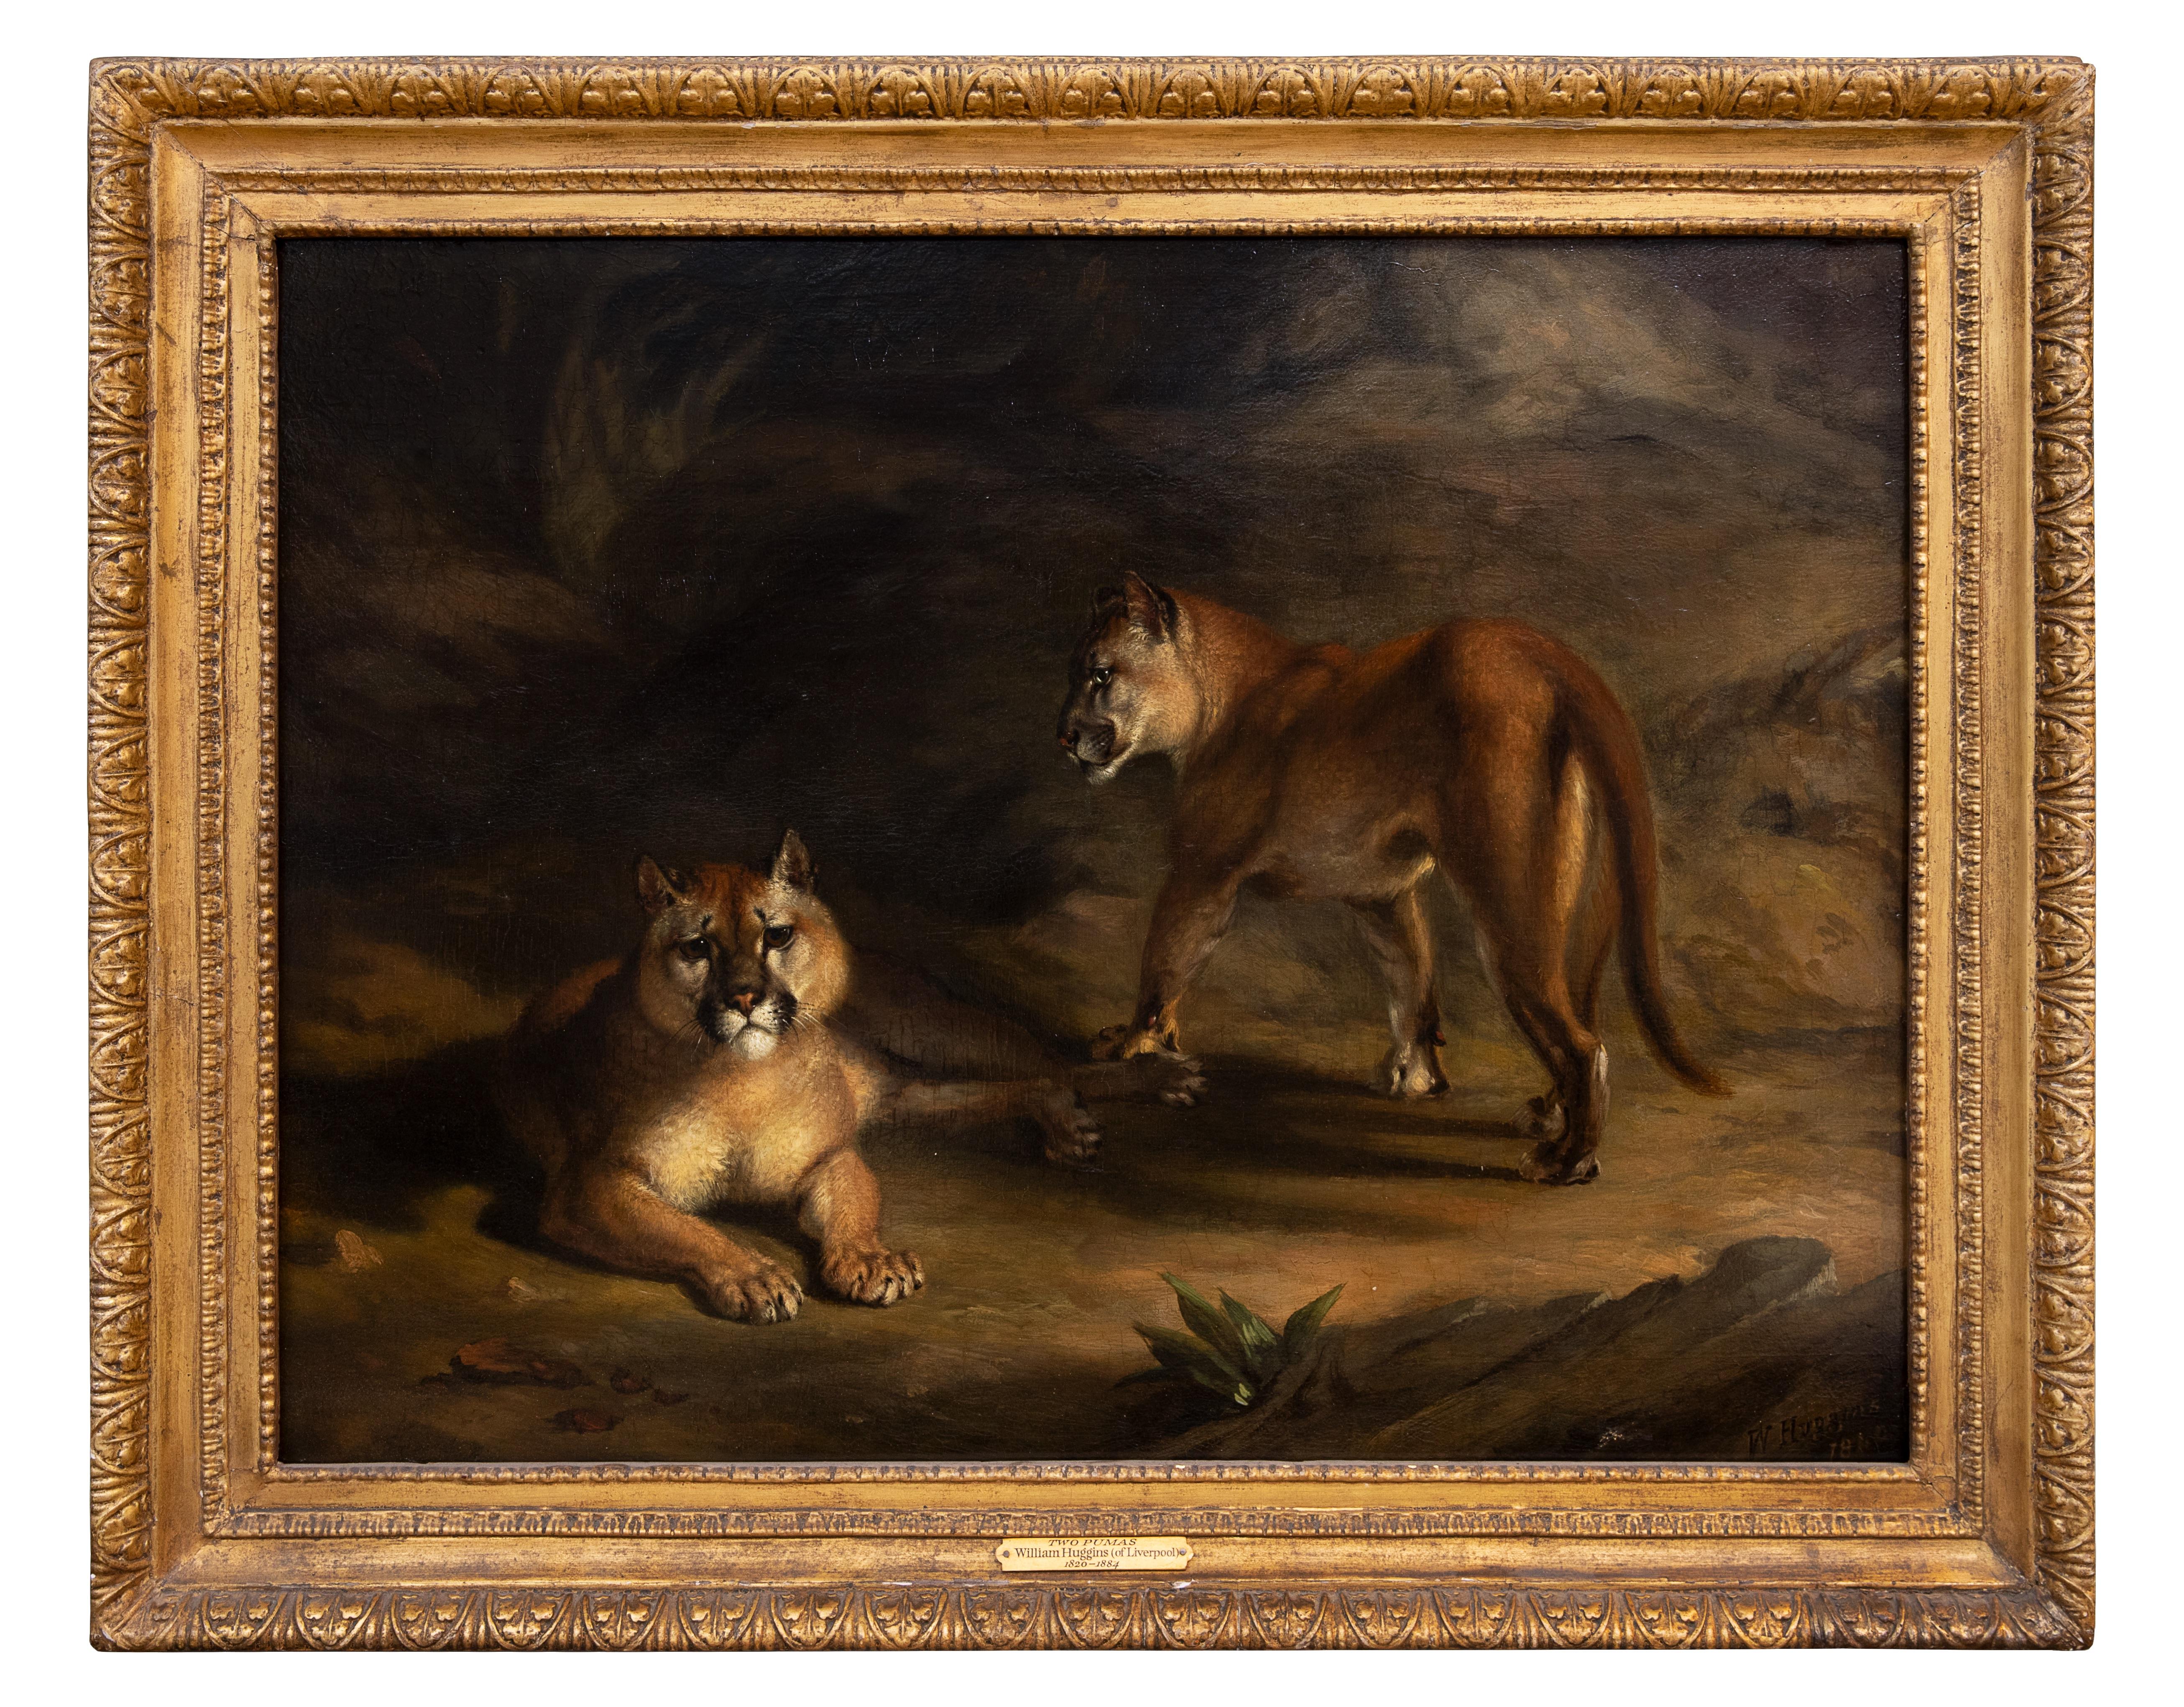 Two Pumas in a Landscape - Painting by William Huggins